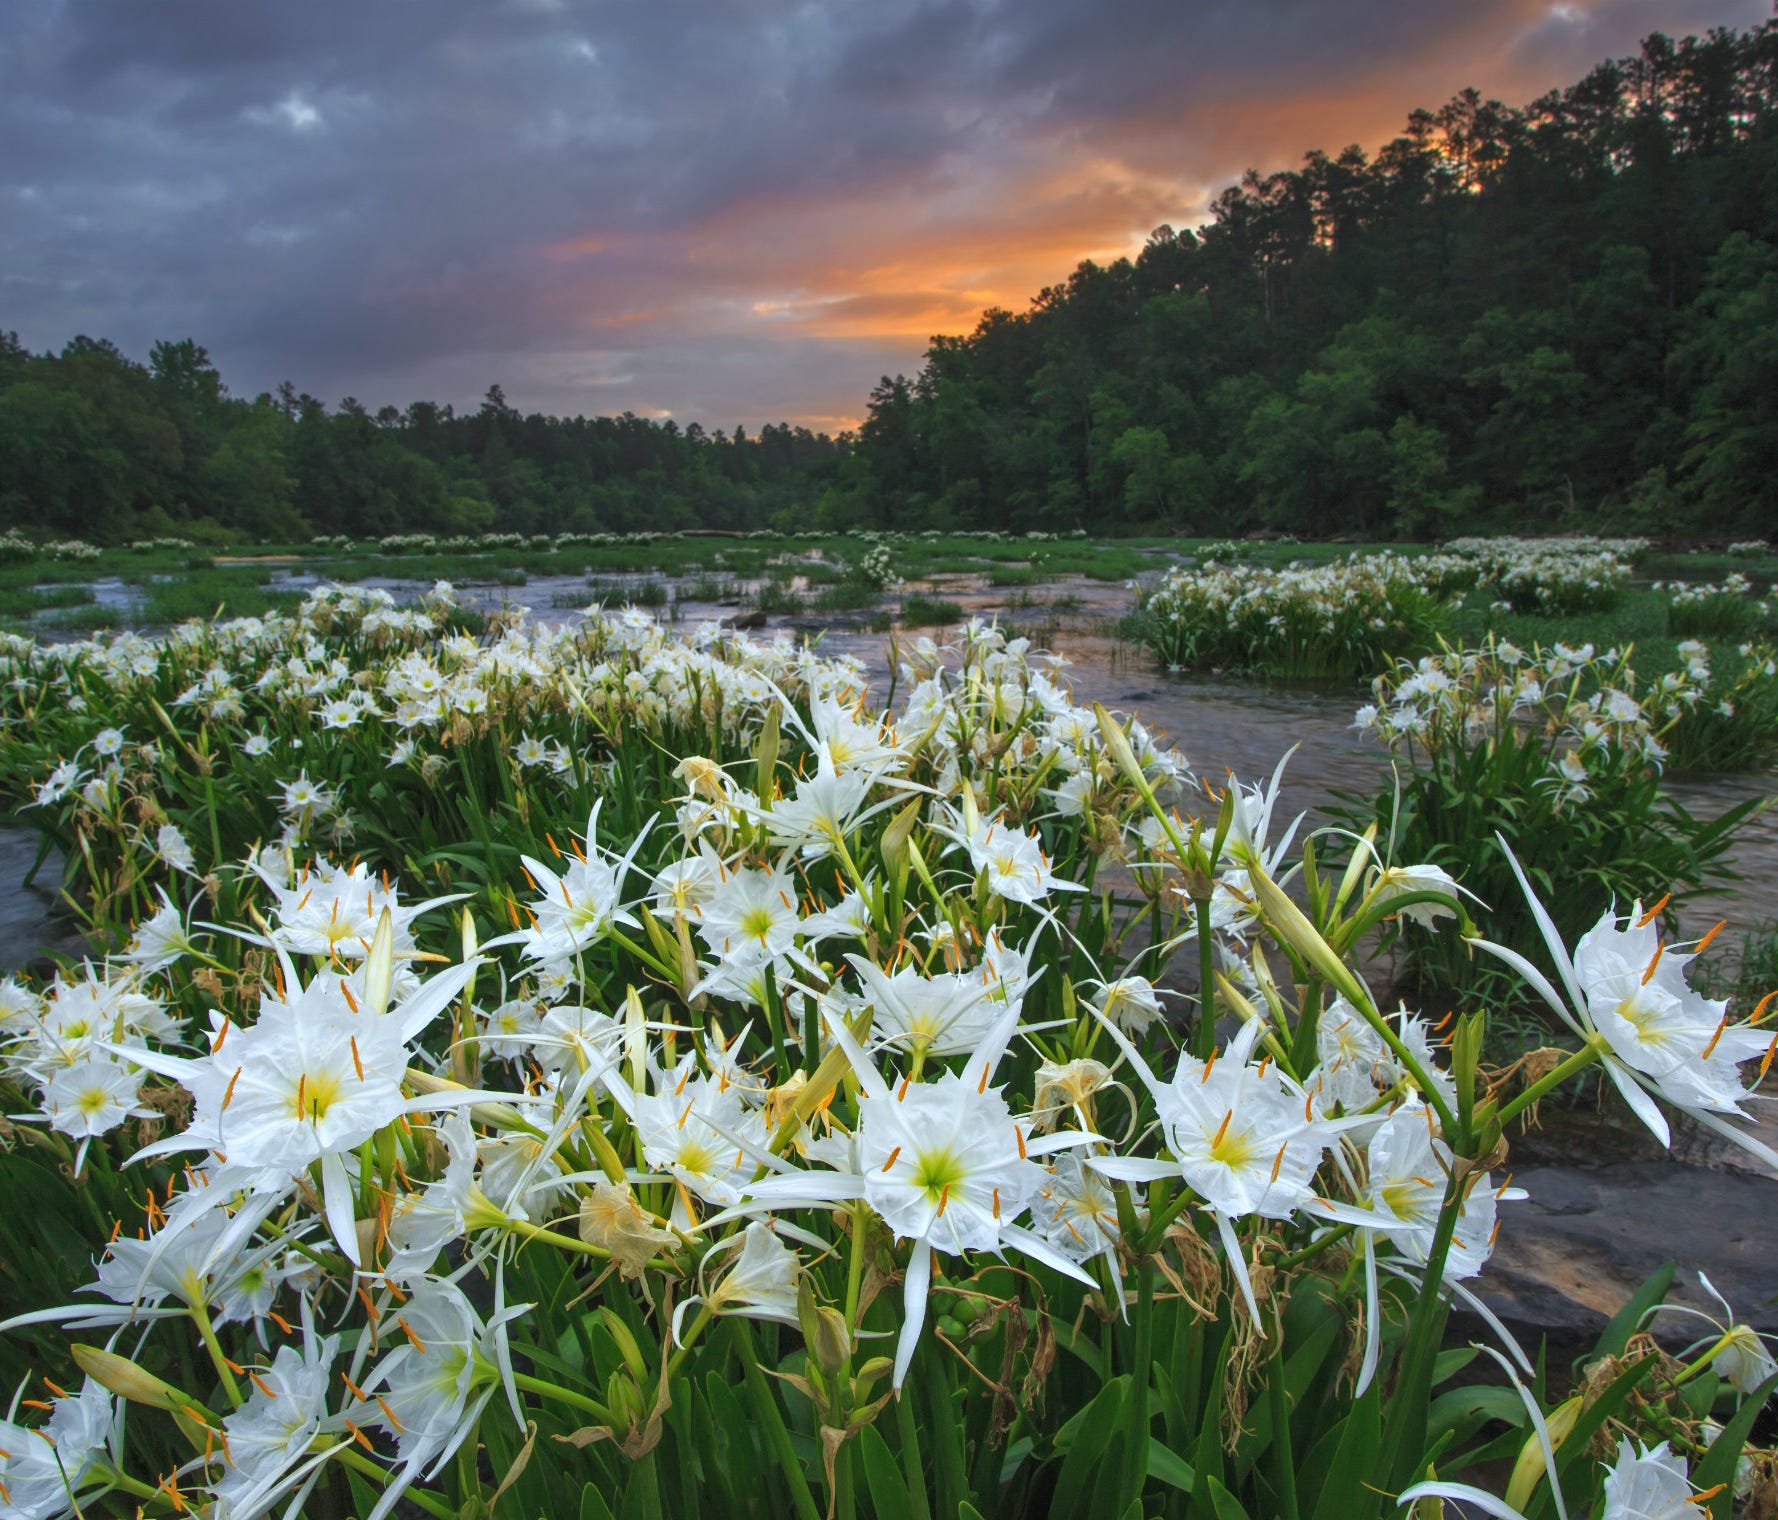 Cahaba River National Wildlife Refuge in Alabama supports 64 rare and imperiled plant and animal species -- 13 of which are found nowhere else in the world. It's home to the largest known stand of Cahaba lilies, a beautiful plant that begins to bloom